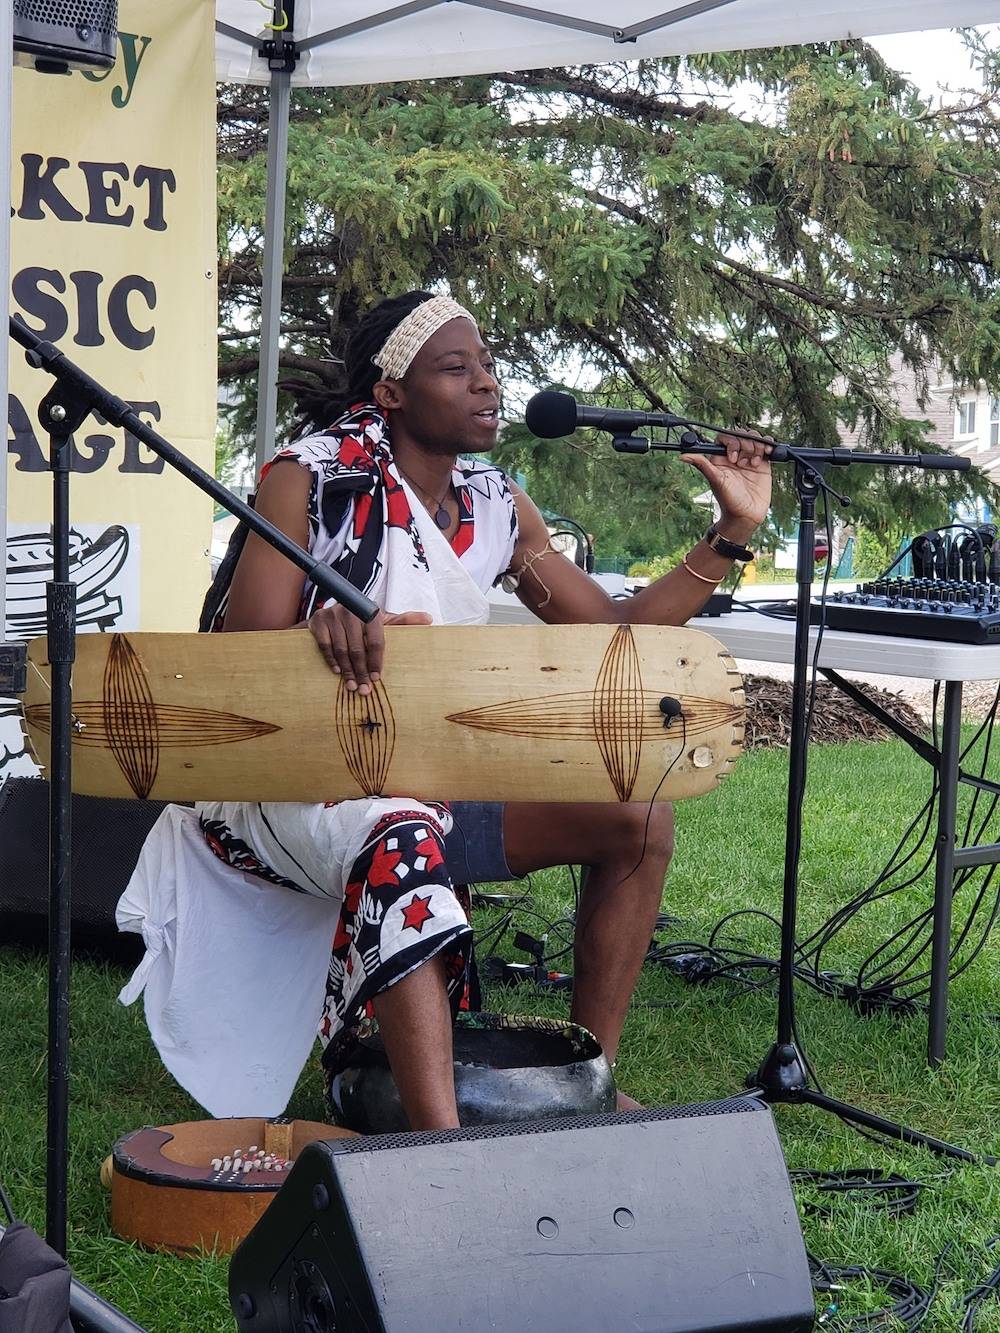 Image: Nyttu Chongo, dressed in shorts and a traditional white wrap with red and black patterns, performs a concert outdoots. He holds a traditional instrument while speaking or singing into a microphone. Sevel instruments sit at his feet. Image from the Facebook event.